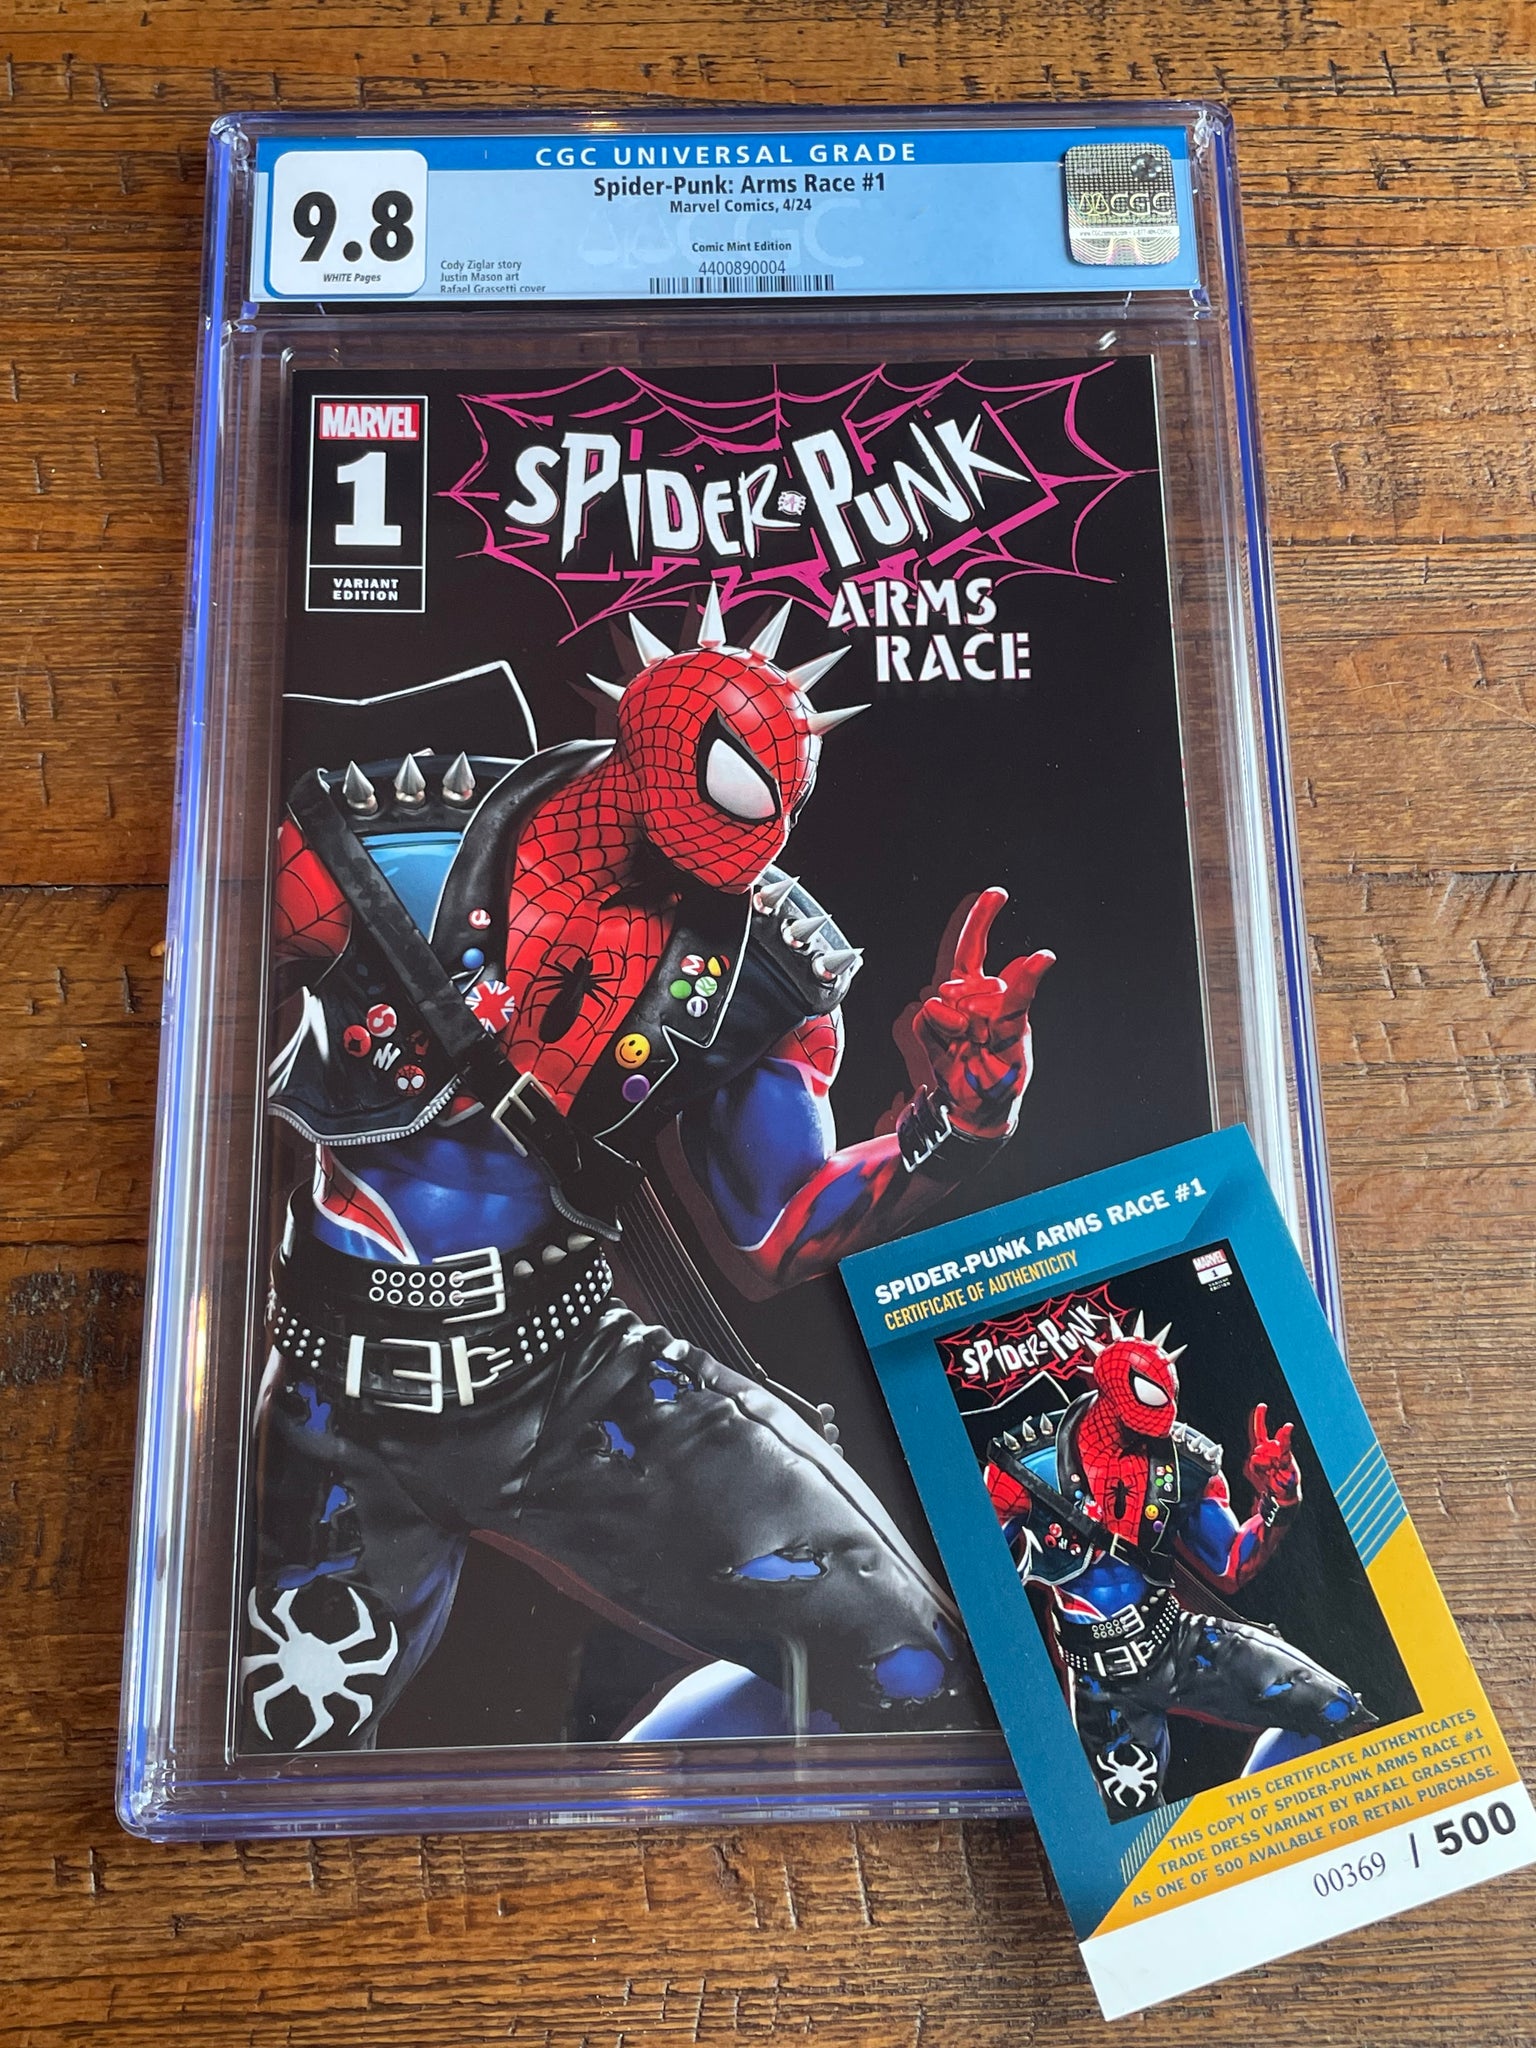 SPIDER-PUNK ARMS RACE #1 CGC 9.8 GRASSETTI EXCLUSIVE VARIANT LIMITED TO 500